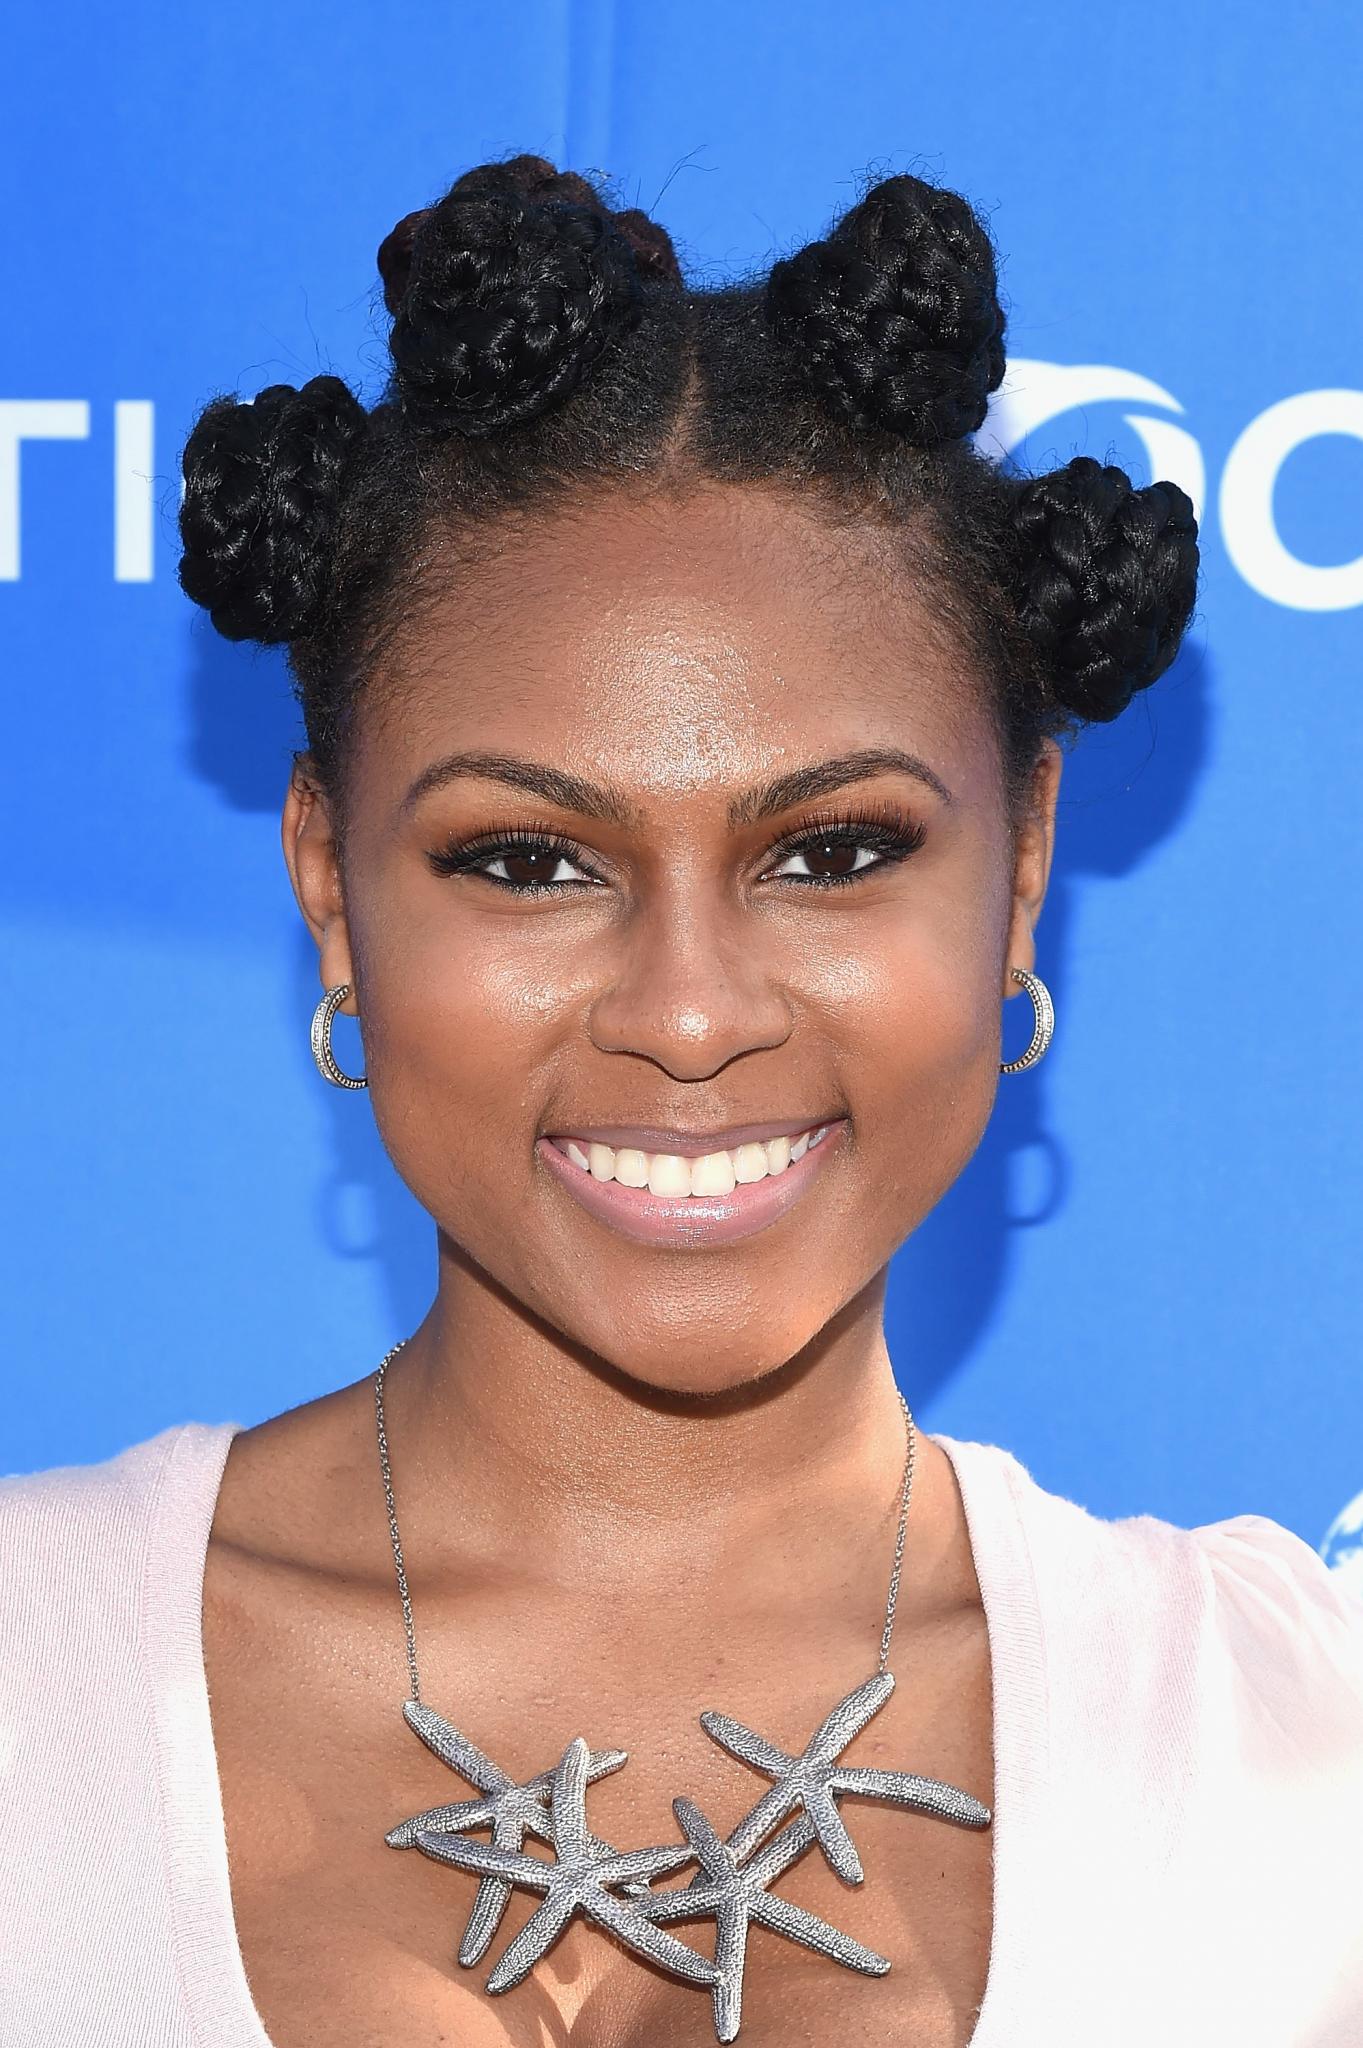 These Black Bantu Knot-Rocking Celebrities Are Showing Everyone How It's Done
